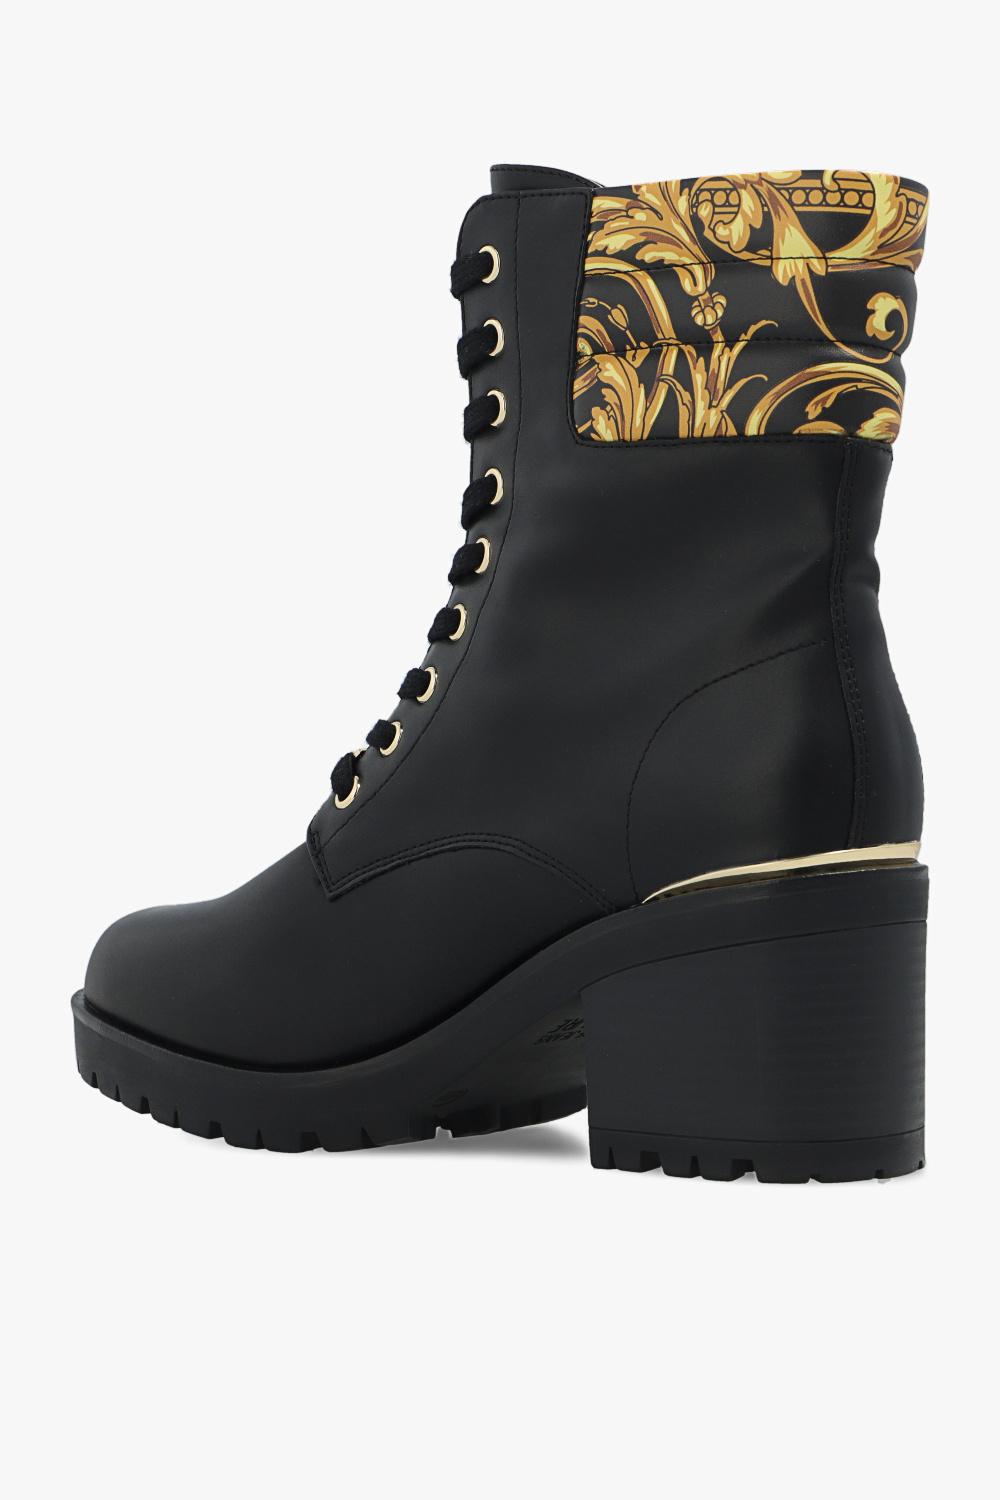 Versace Jeans Couture Women's High Heel Signature Print Ankle Boots